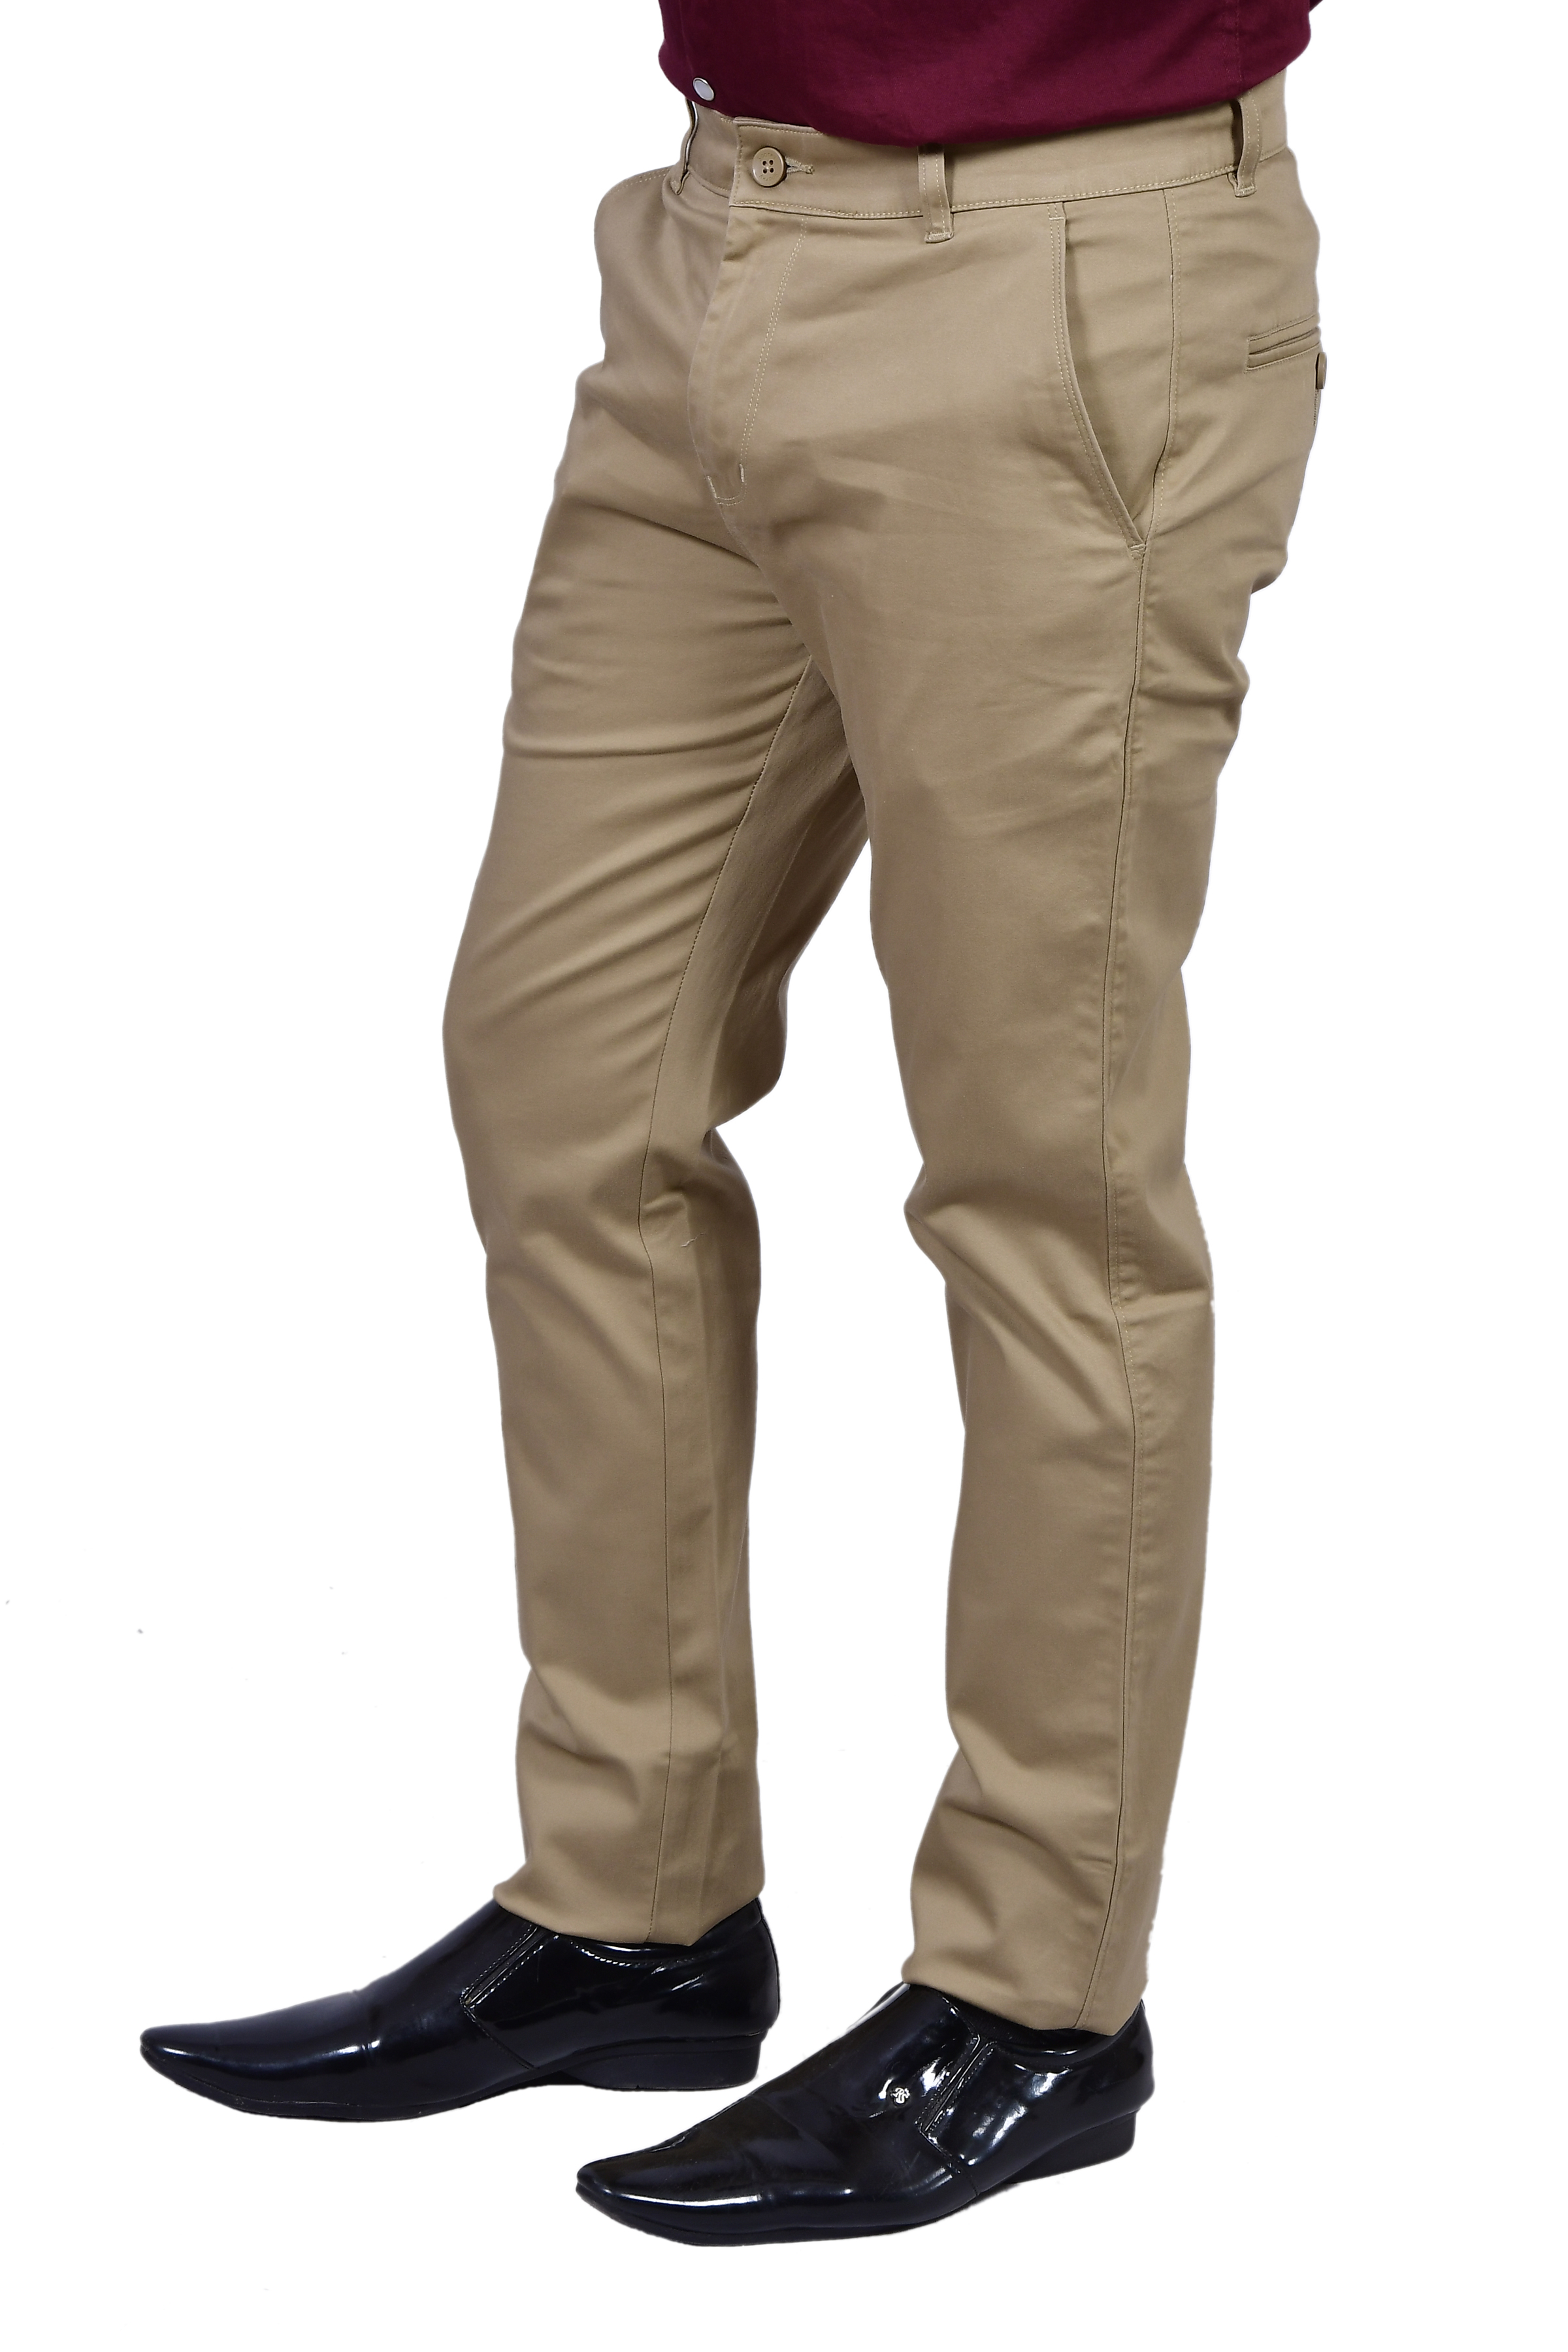 Sparky Premium Trousers  111  3109  Udaan  B2B Buying for Retailers